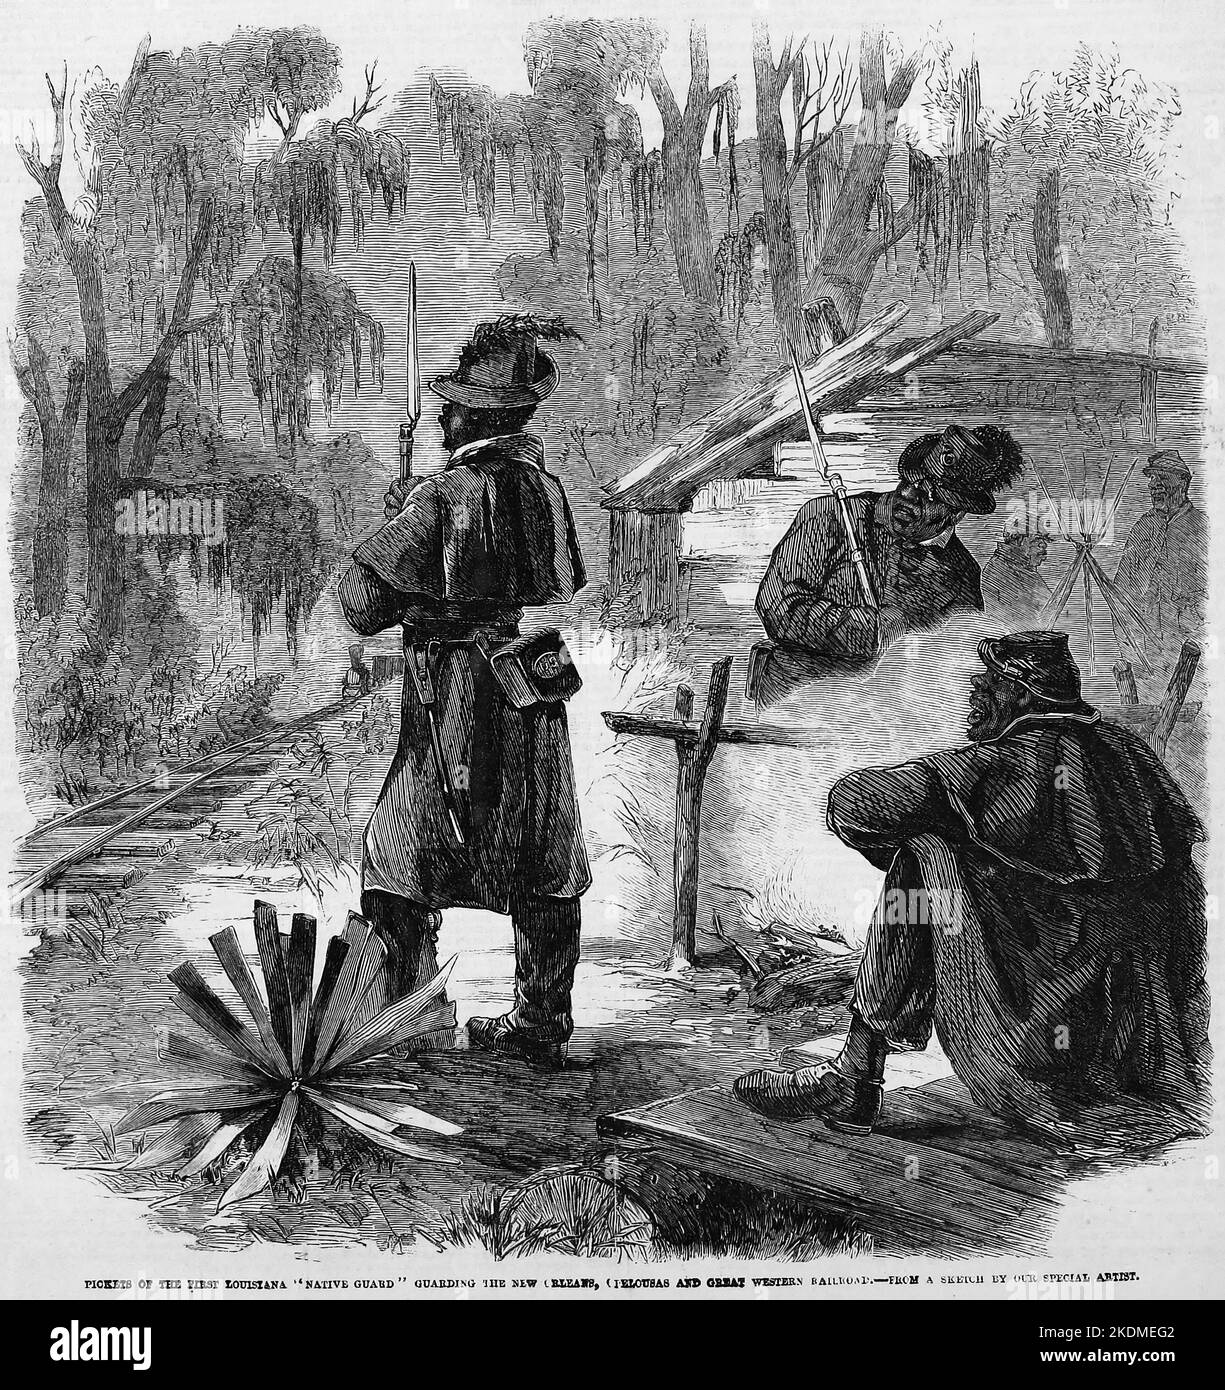 Pickets of the first Louisiana "Native Guard" guarding the New Orleans, Opelousas and Great Western Railroad. February 1863. 19th century American Civil War illustration from Frank Leslie's Illustrated Newspaper Stock Photo